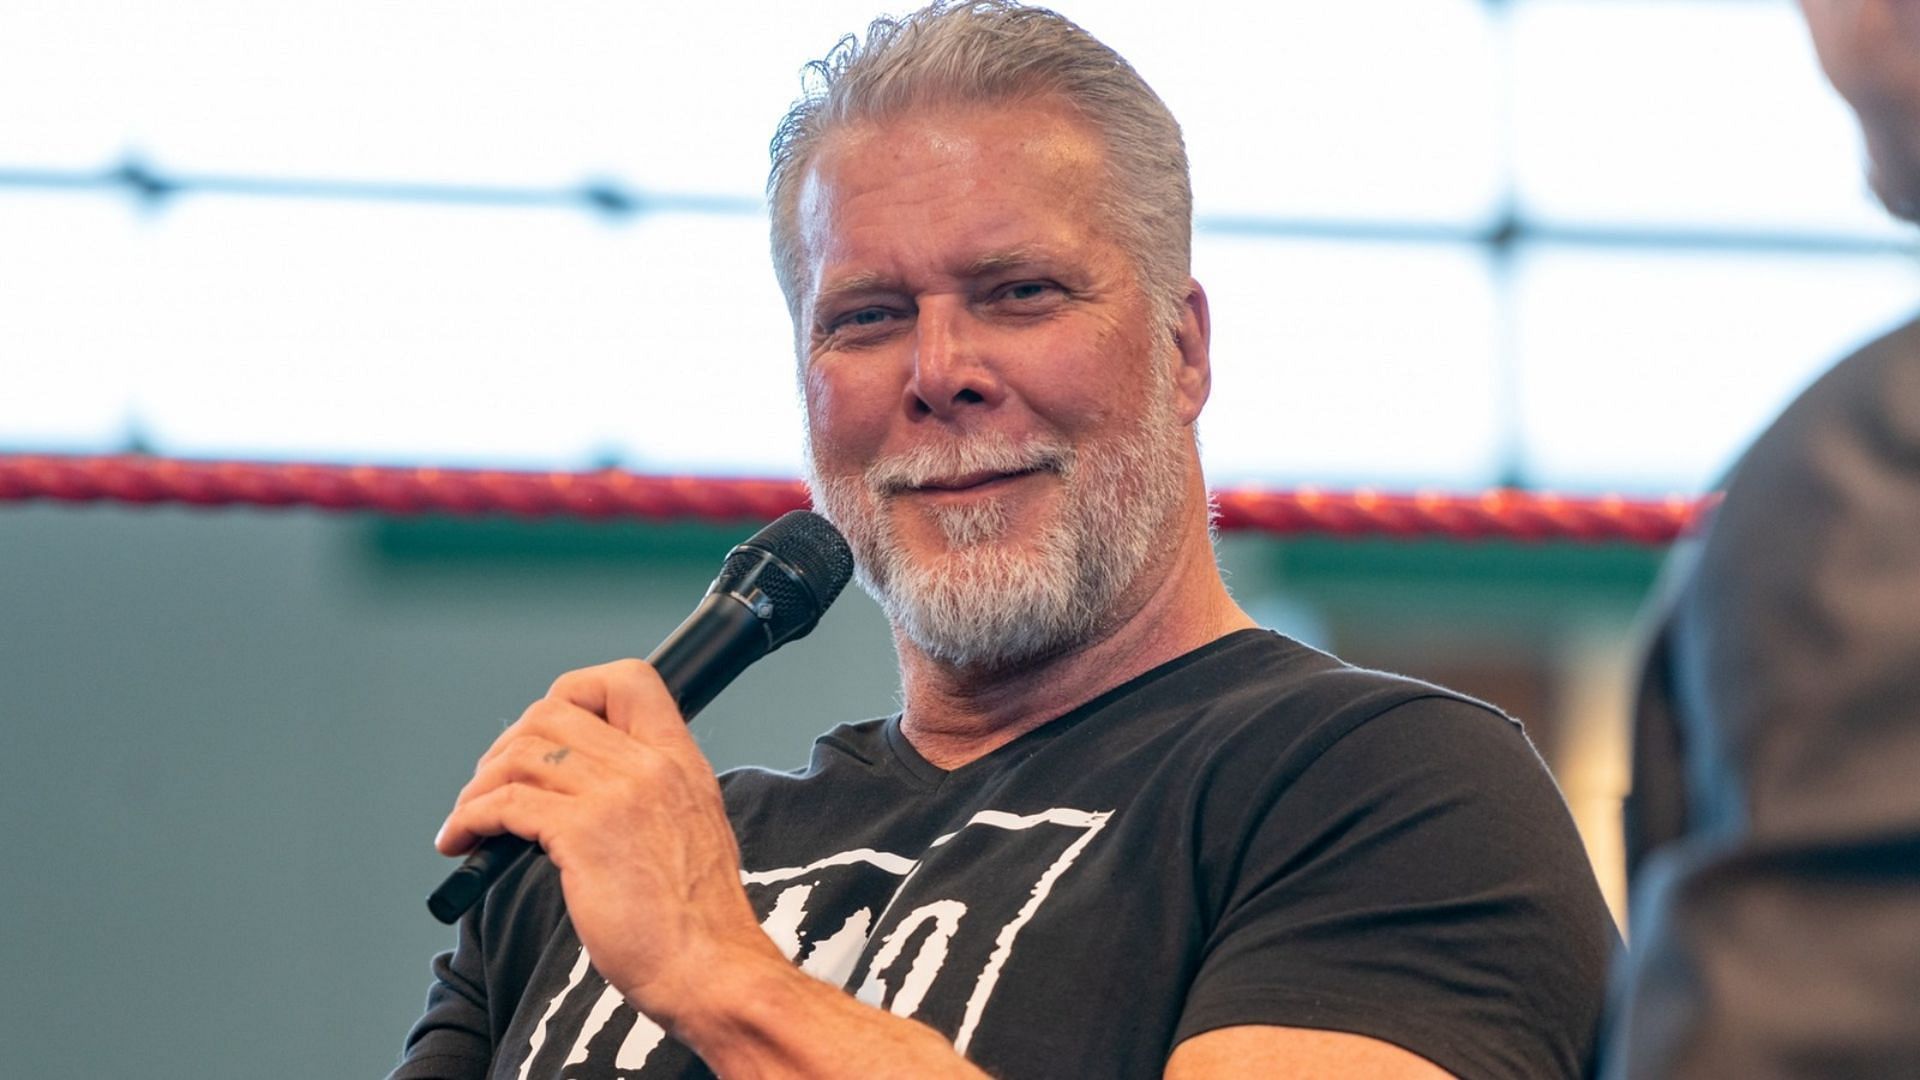 Kevin Nash is a former WWE Champion and Hall of Famer.